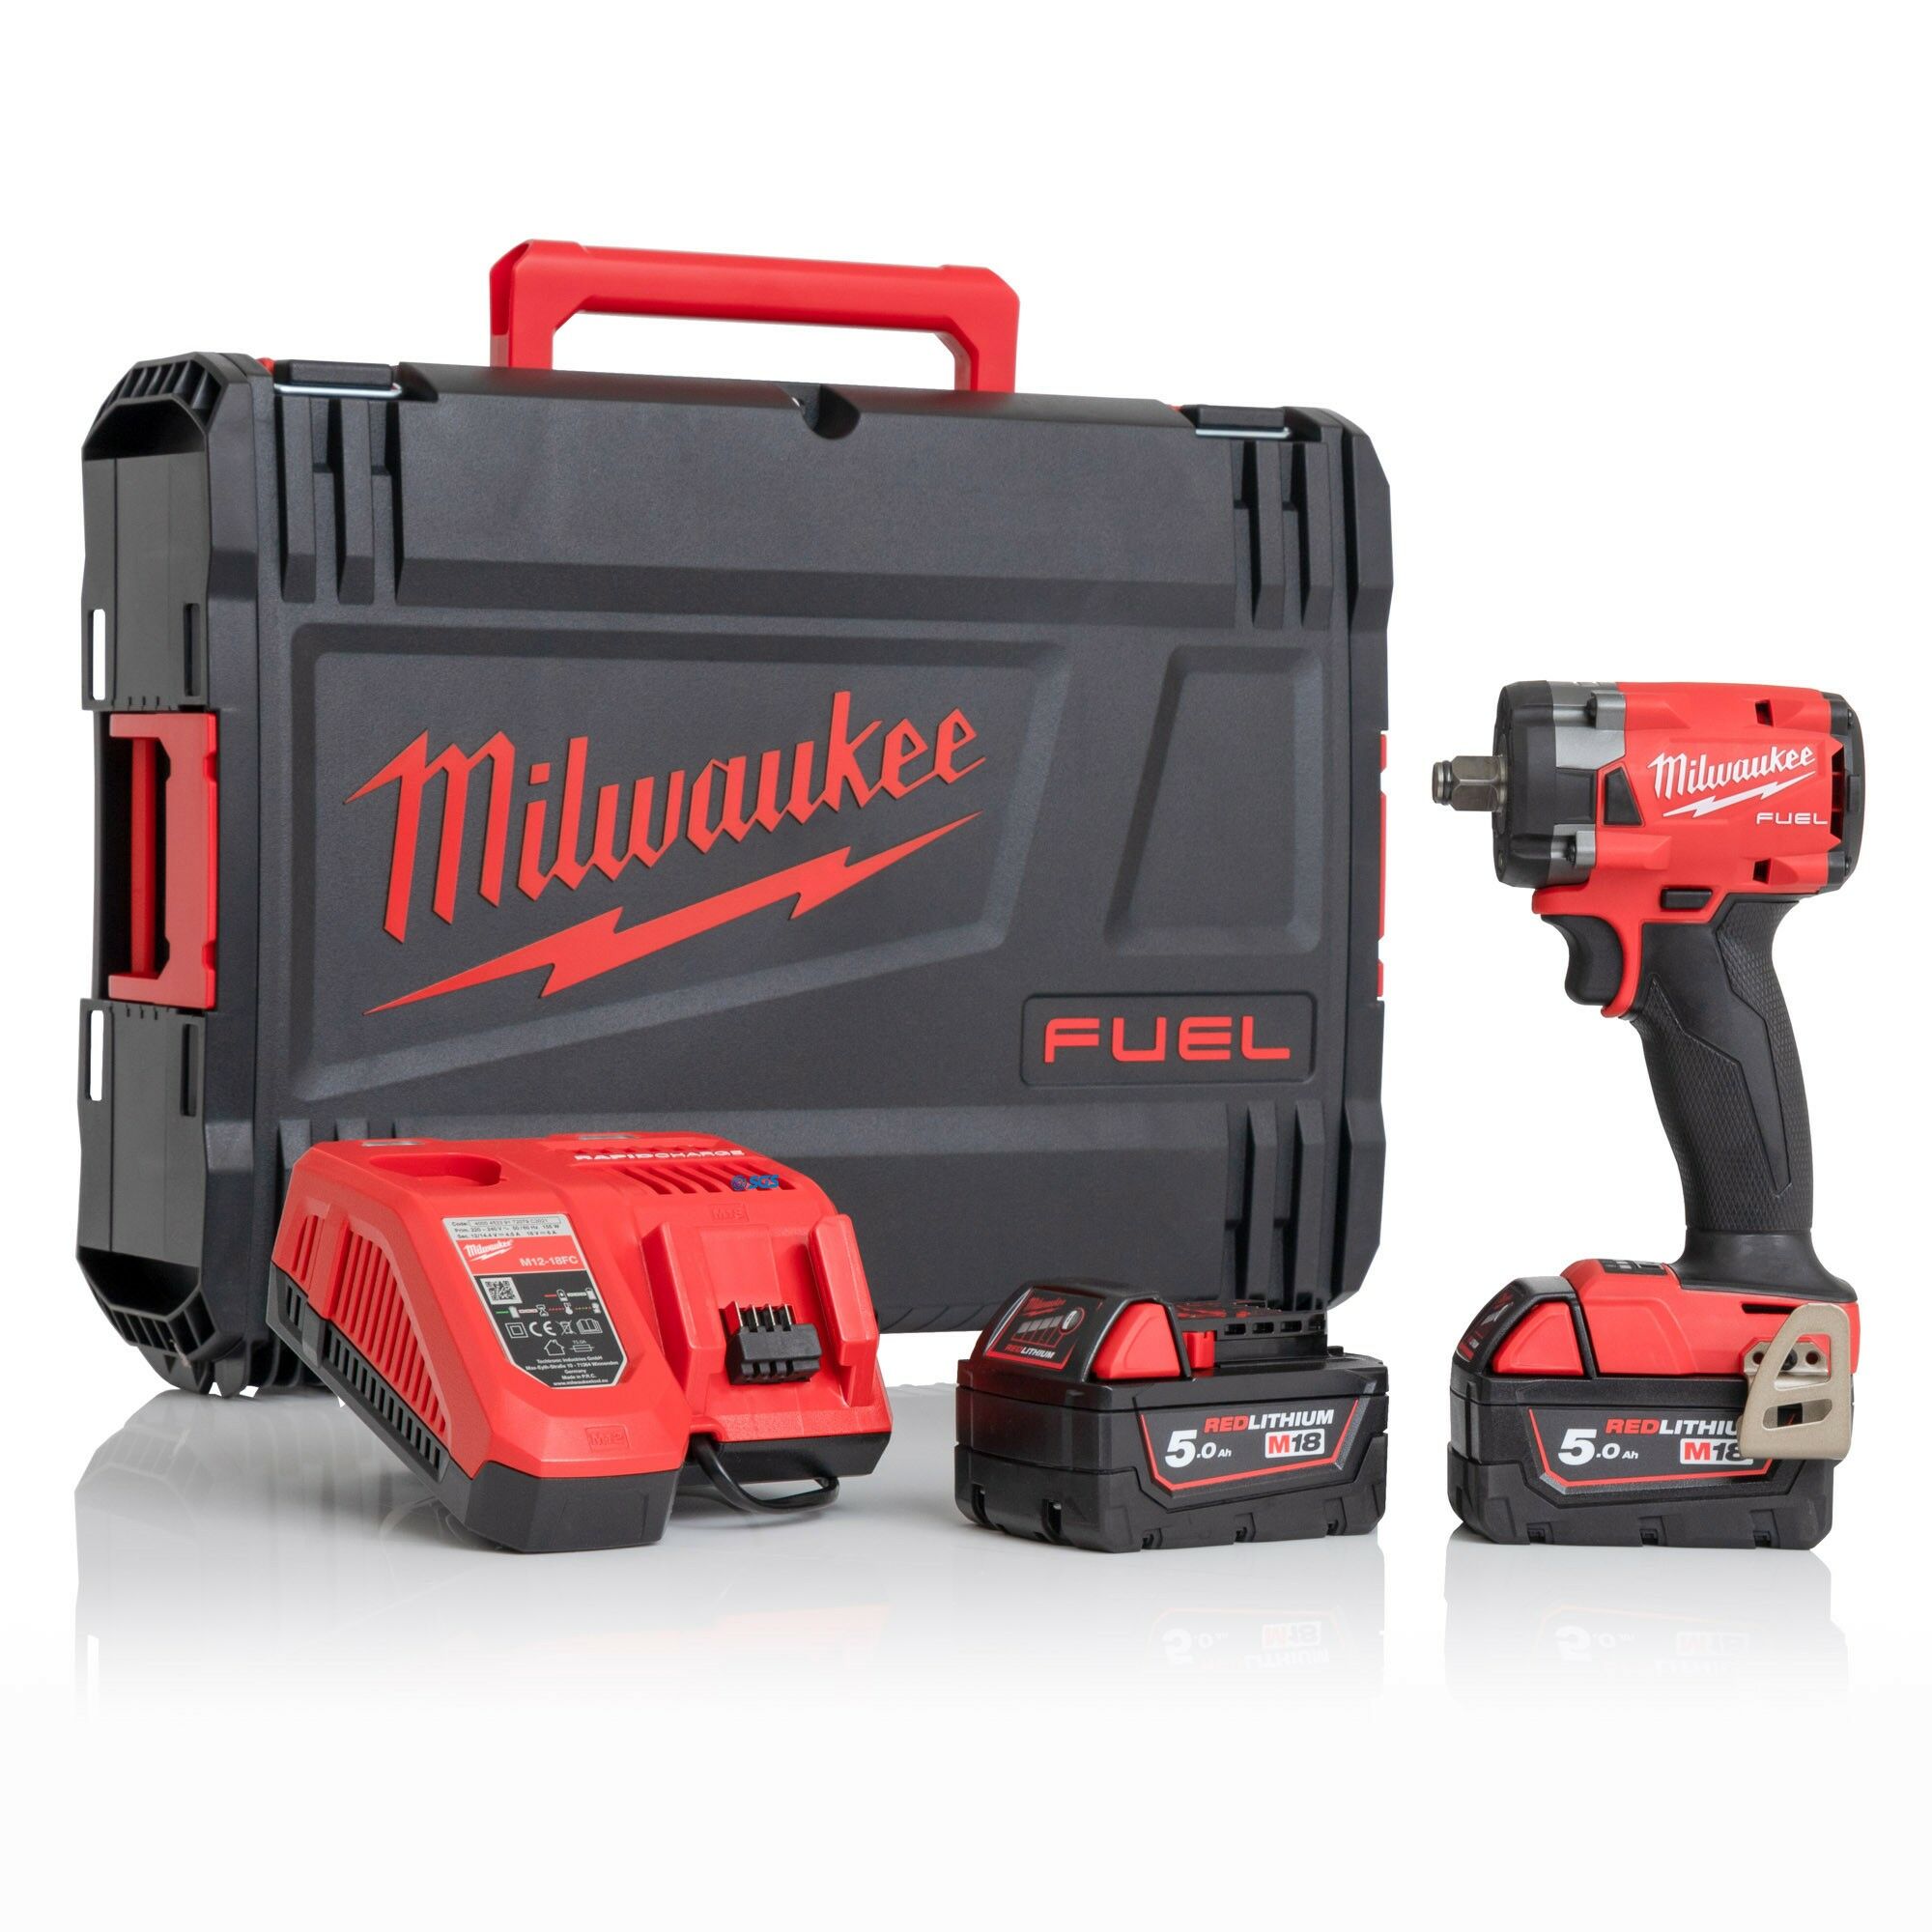 Milwaukee M18FIW2F12-502X M18 FUEL™ 18V 1/2" Compact Impact Wrench Kit - 2x 5Ah Batteries, Charger and Case